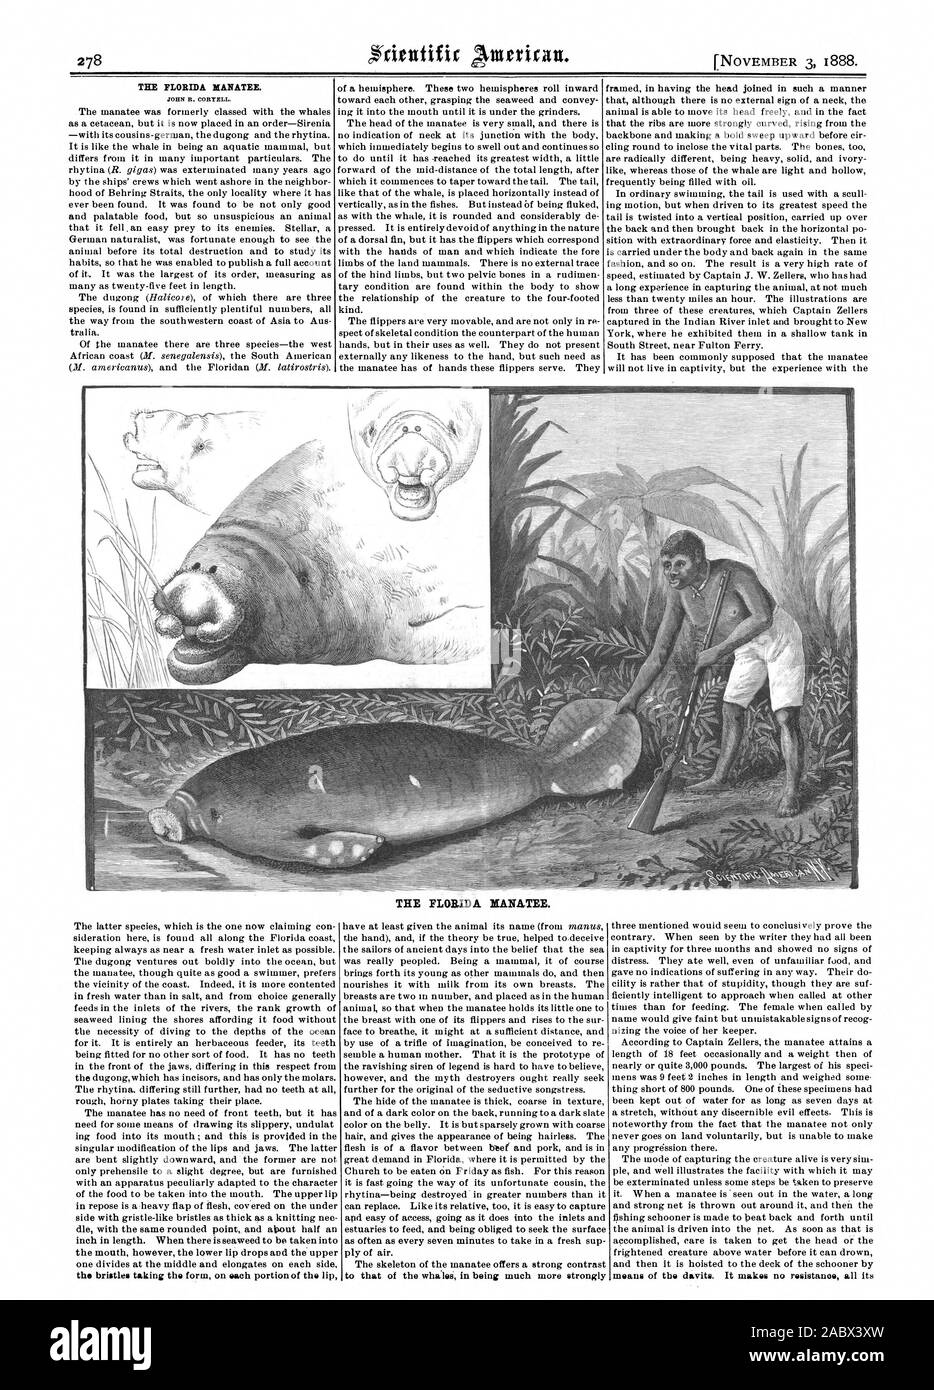 THE FLORIDA MANATEE. JOHN R. CORTELL. THE FLORIDA MANATEE. the bristles taking the form on each portion of the lip to that of the whales in being much more strongly, scientific american, 1888-11-03 Stock Photo